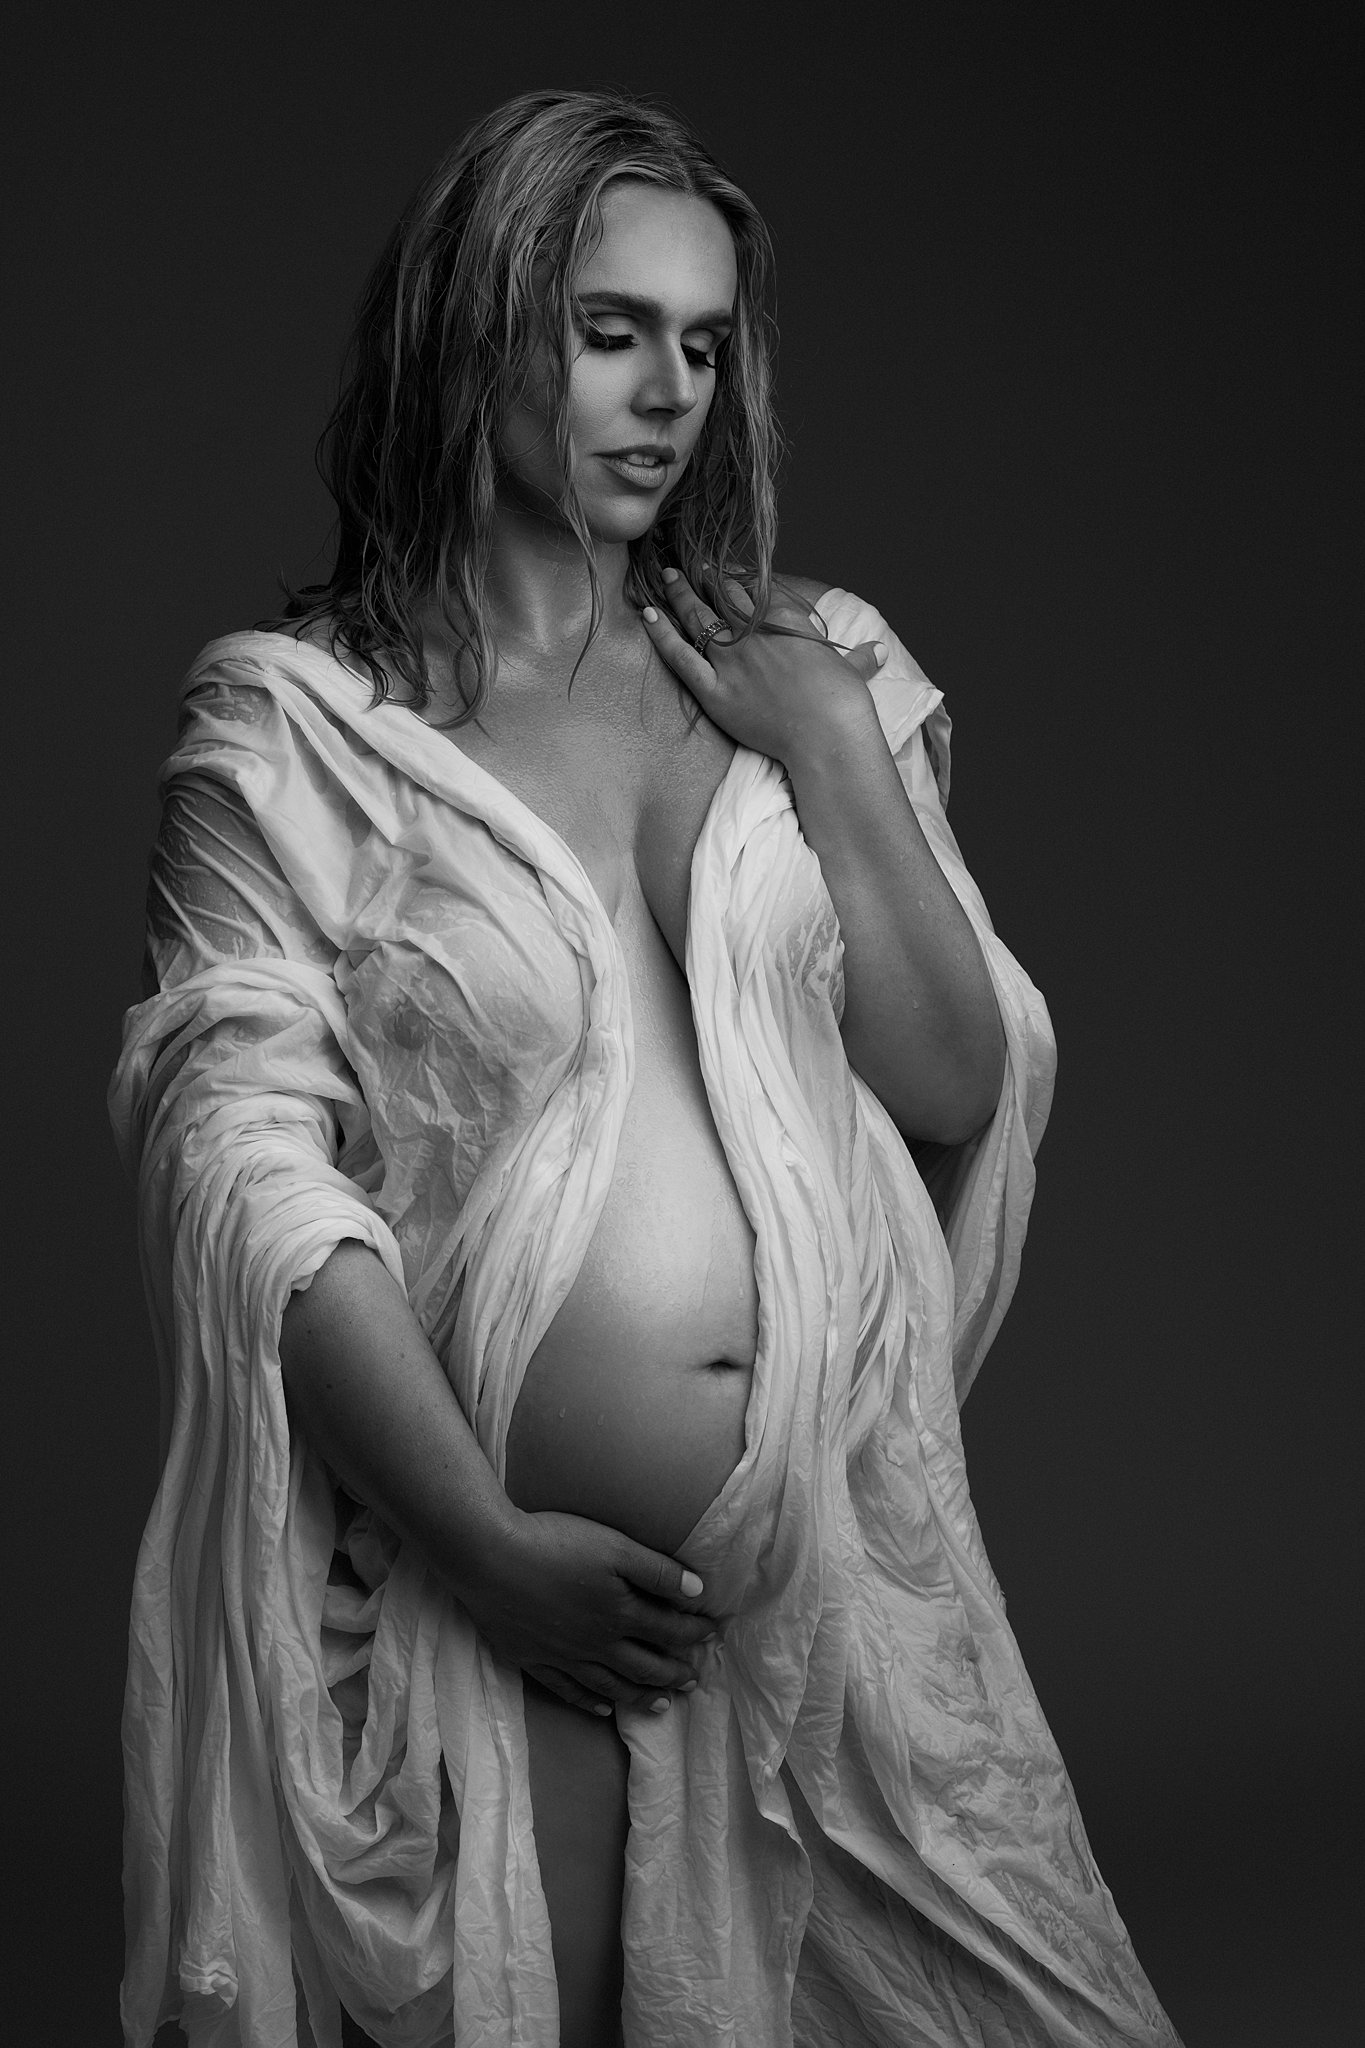 A mom to be draped in a wet white sheet stands in a studio with one hand on her shoulder